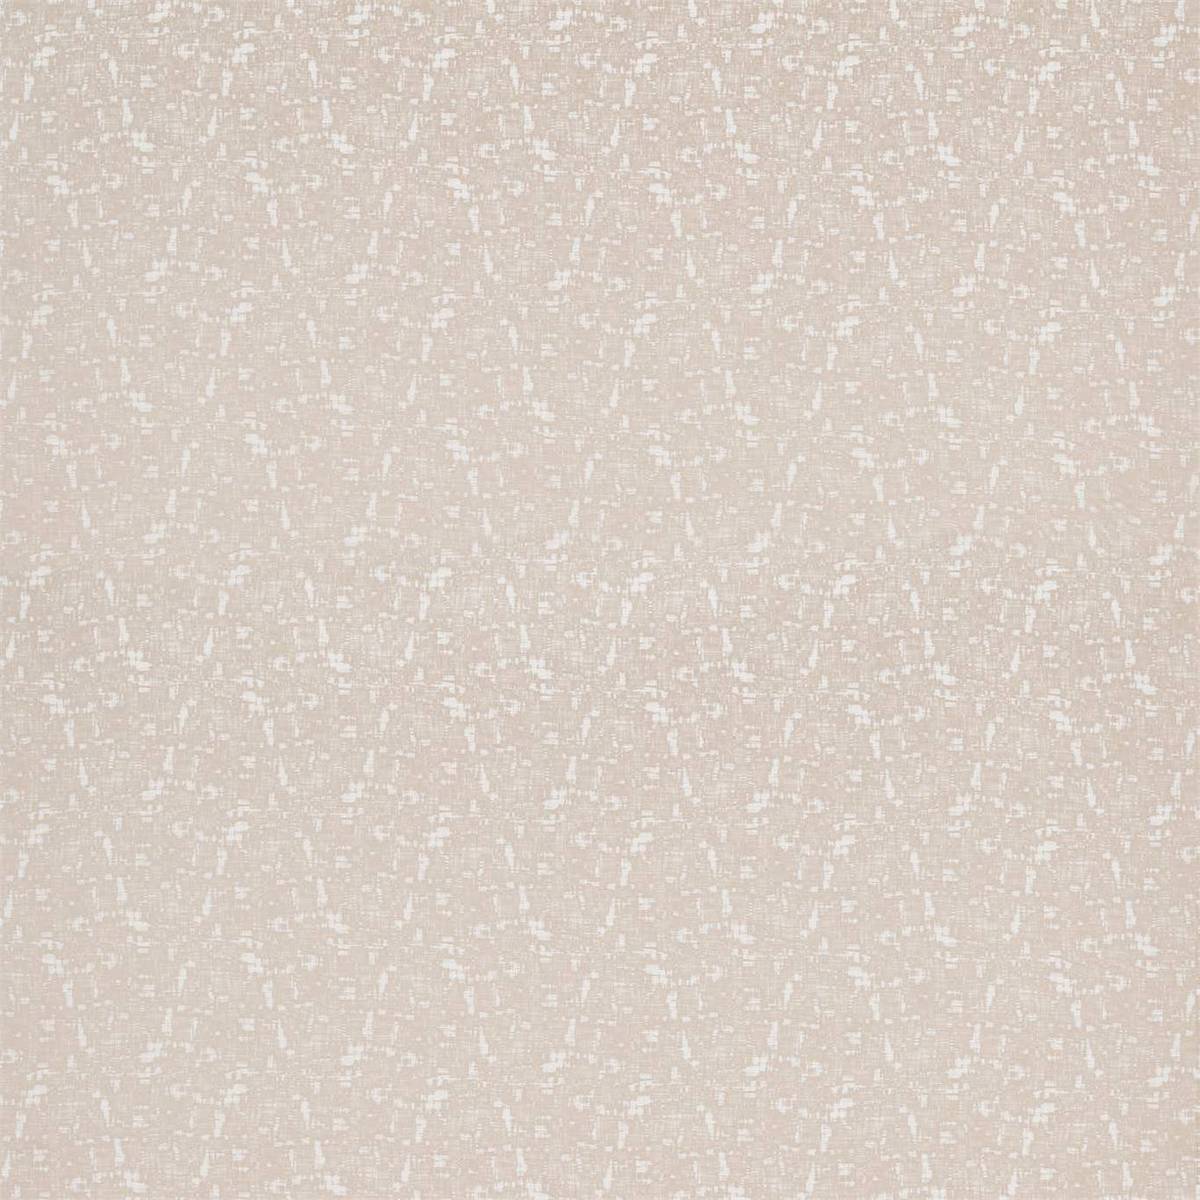 Lucette Blush Fabric by Harlequin